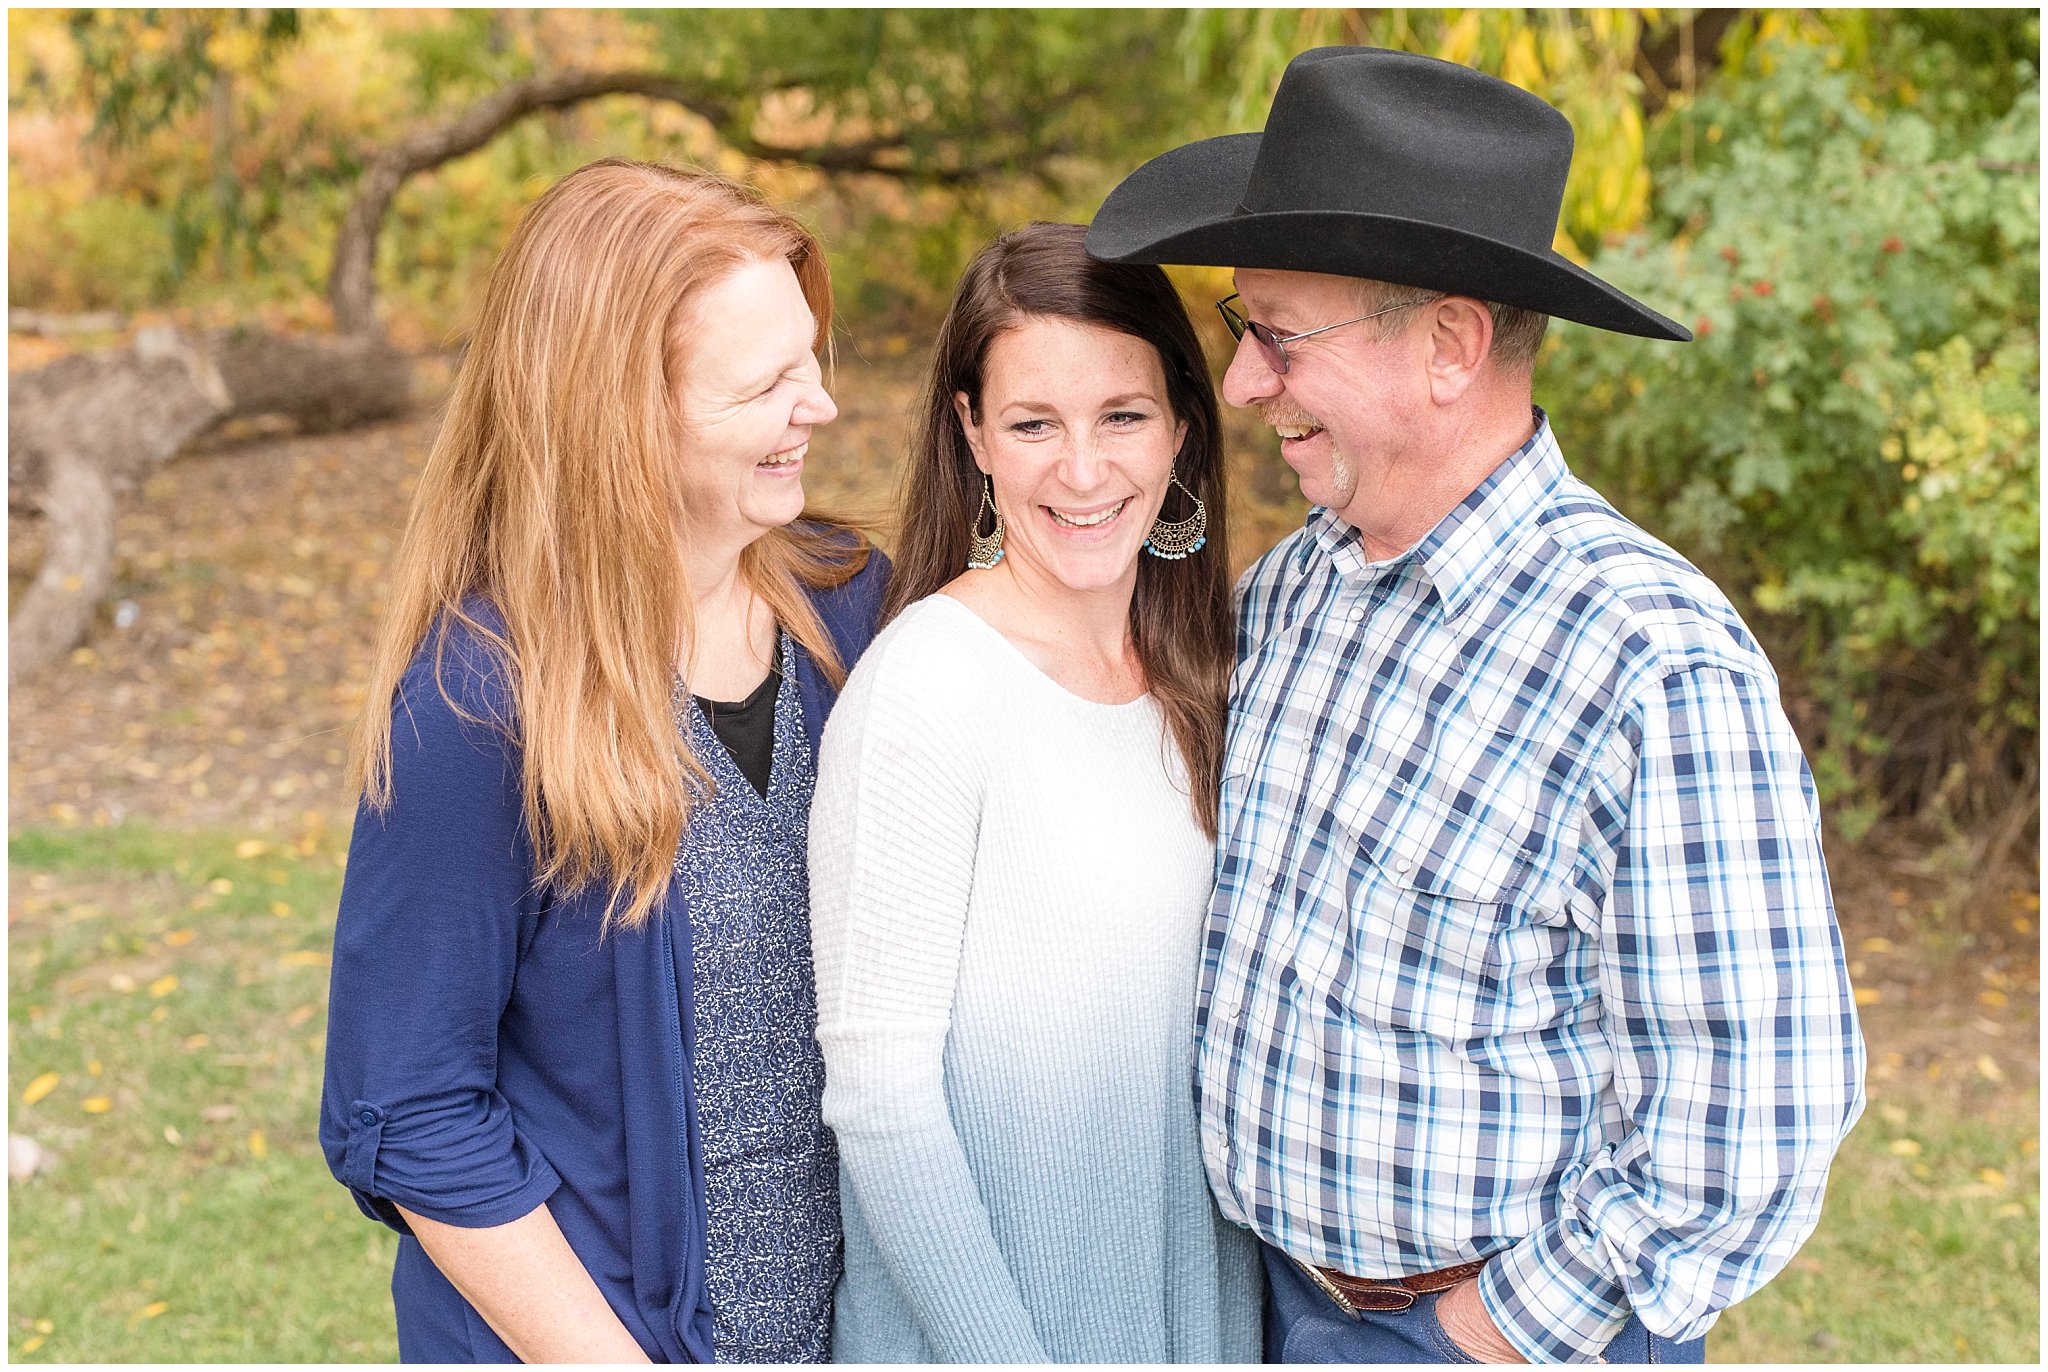 Adult daughter and parents looking and laughing candidly | Tremonton Family Pictures and Make a Wish Event | Jessie and Dallin Photography